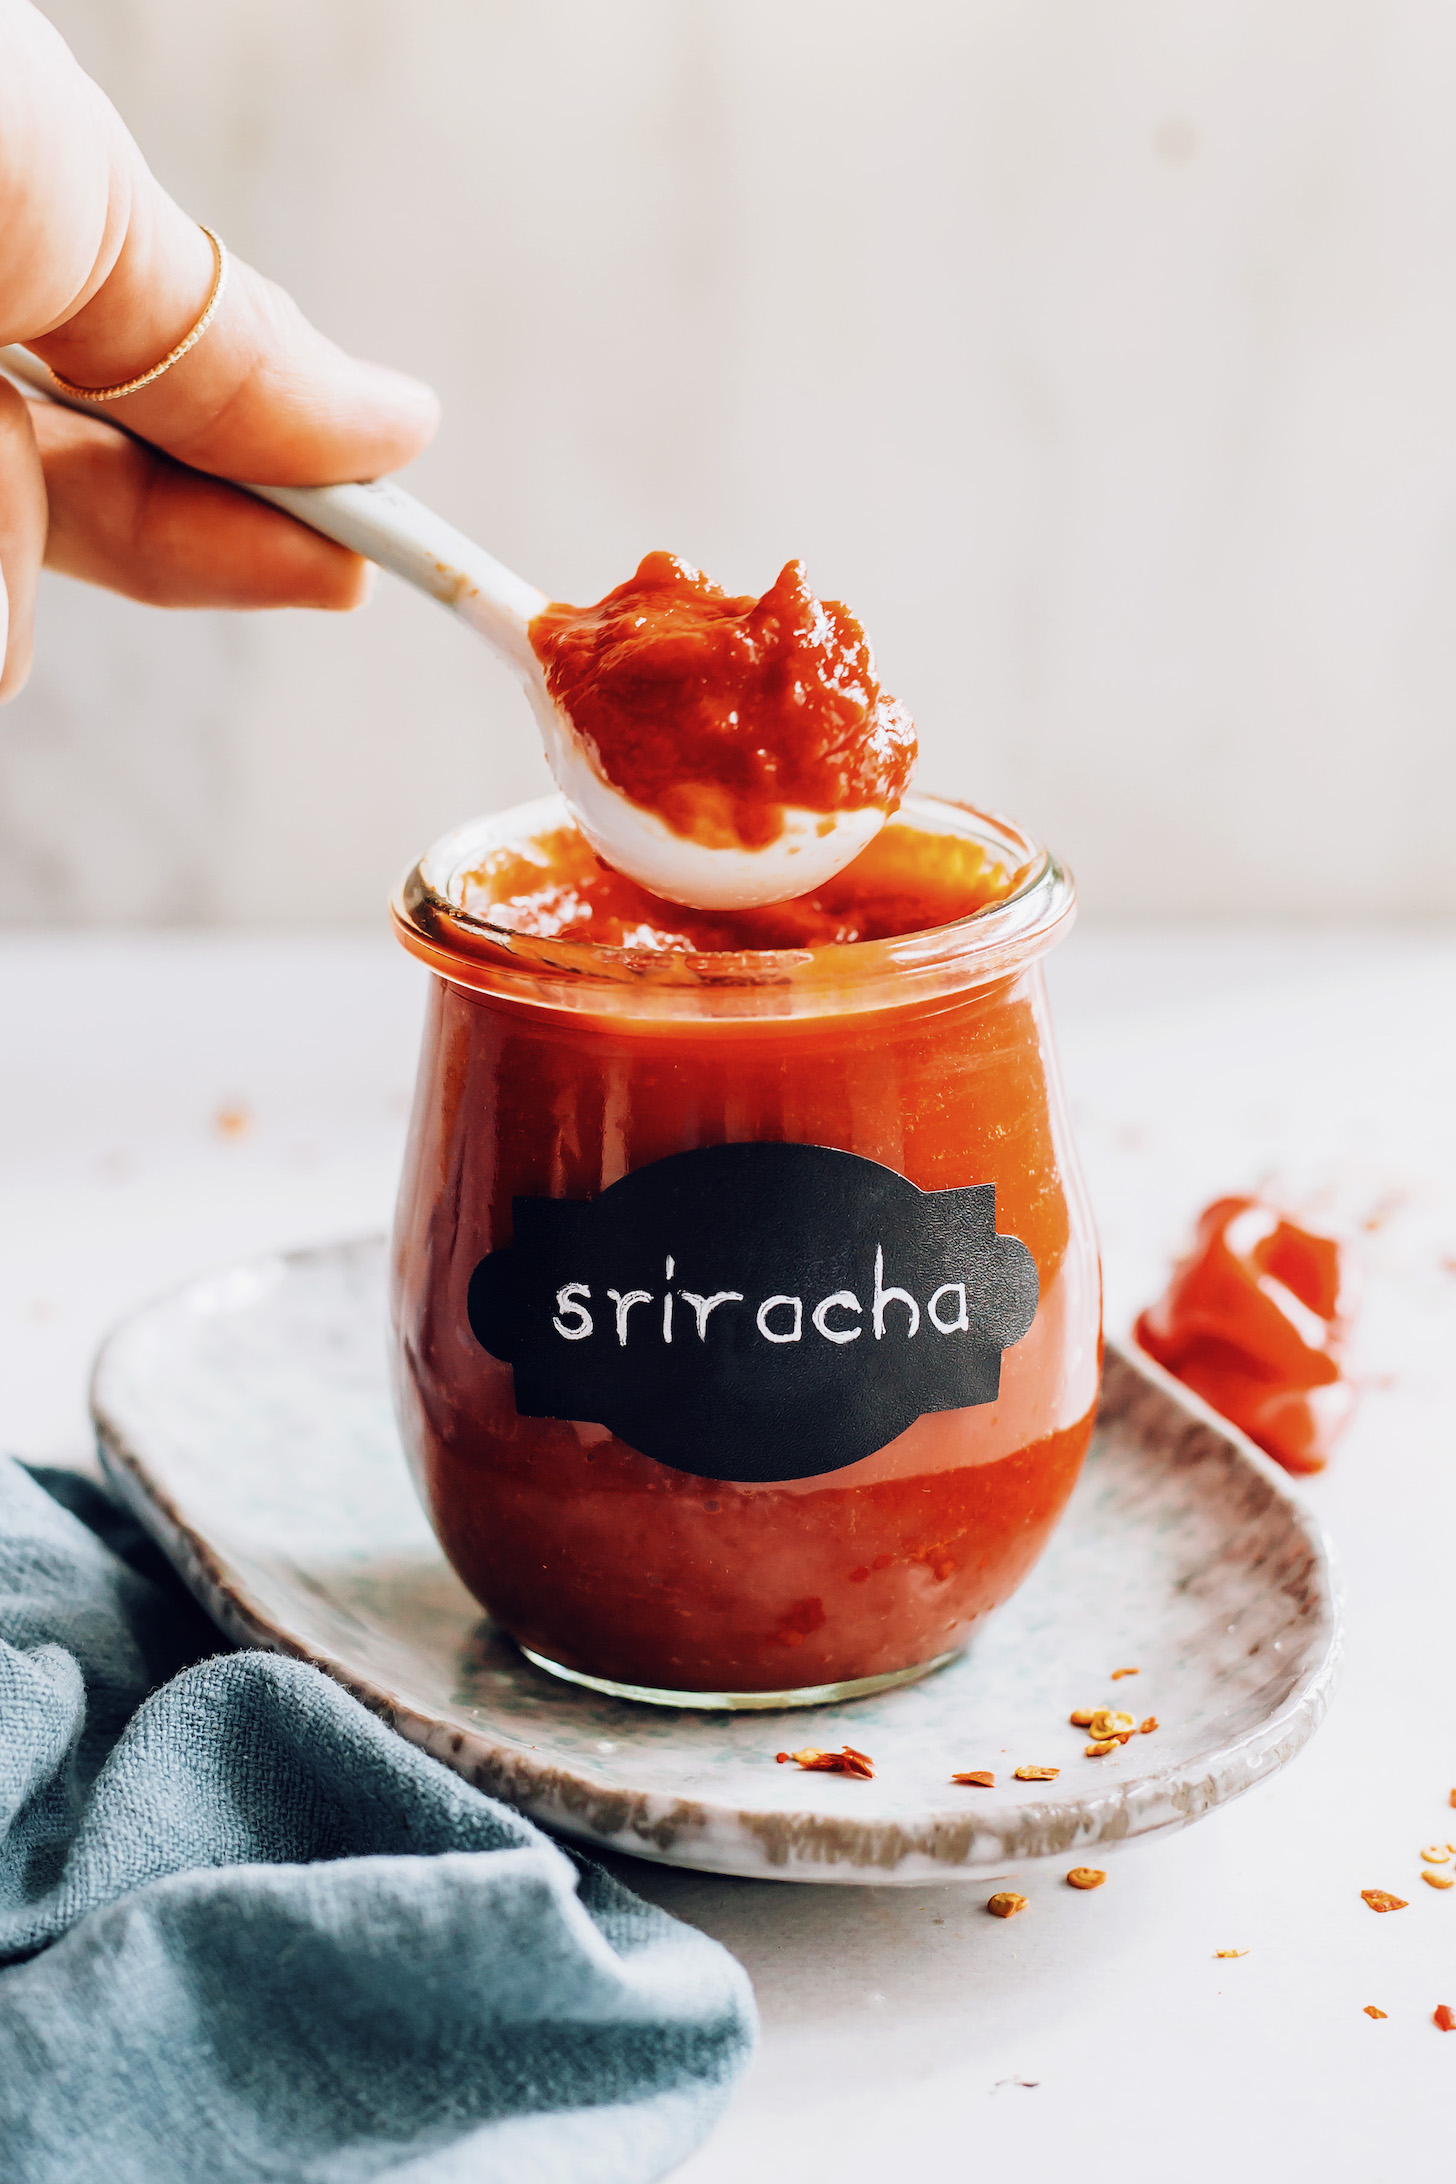 Holding a spoonful of homemade sriracha over a jar